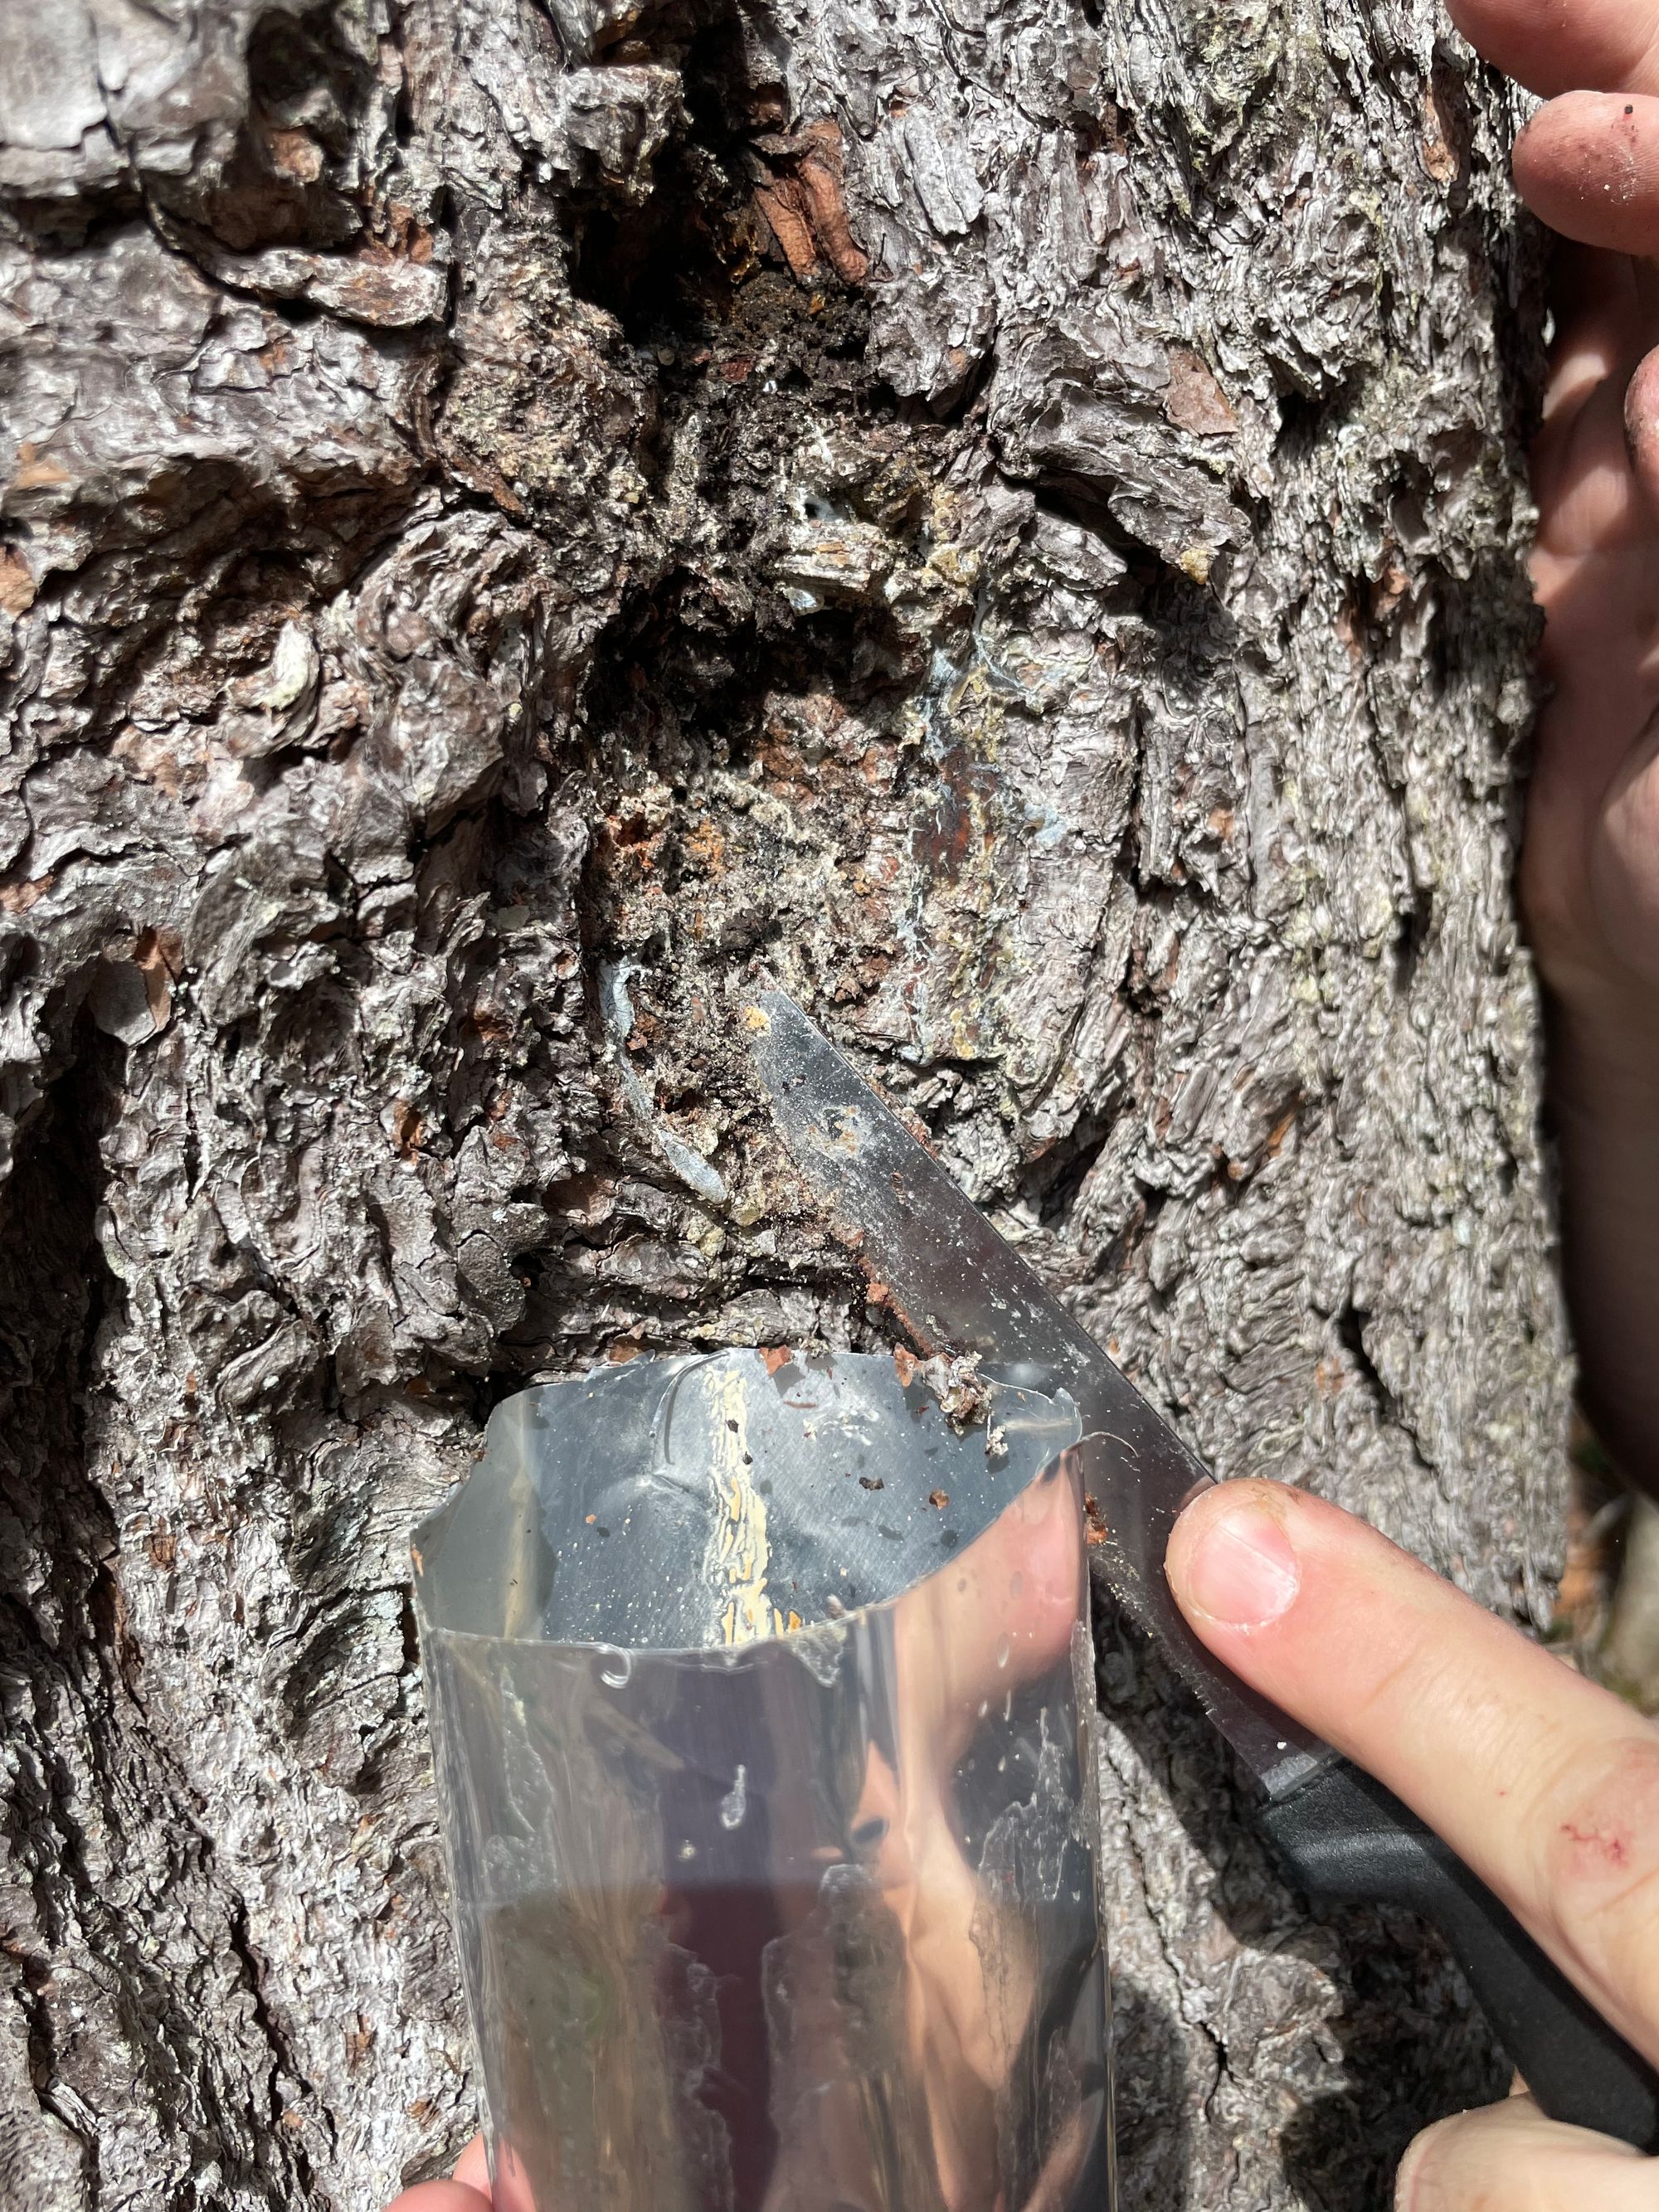 Harvesting Pine Resin for Bee’s Wax Wraps